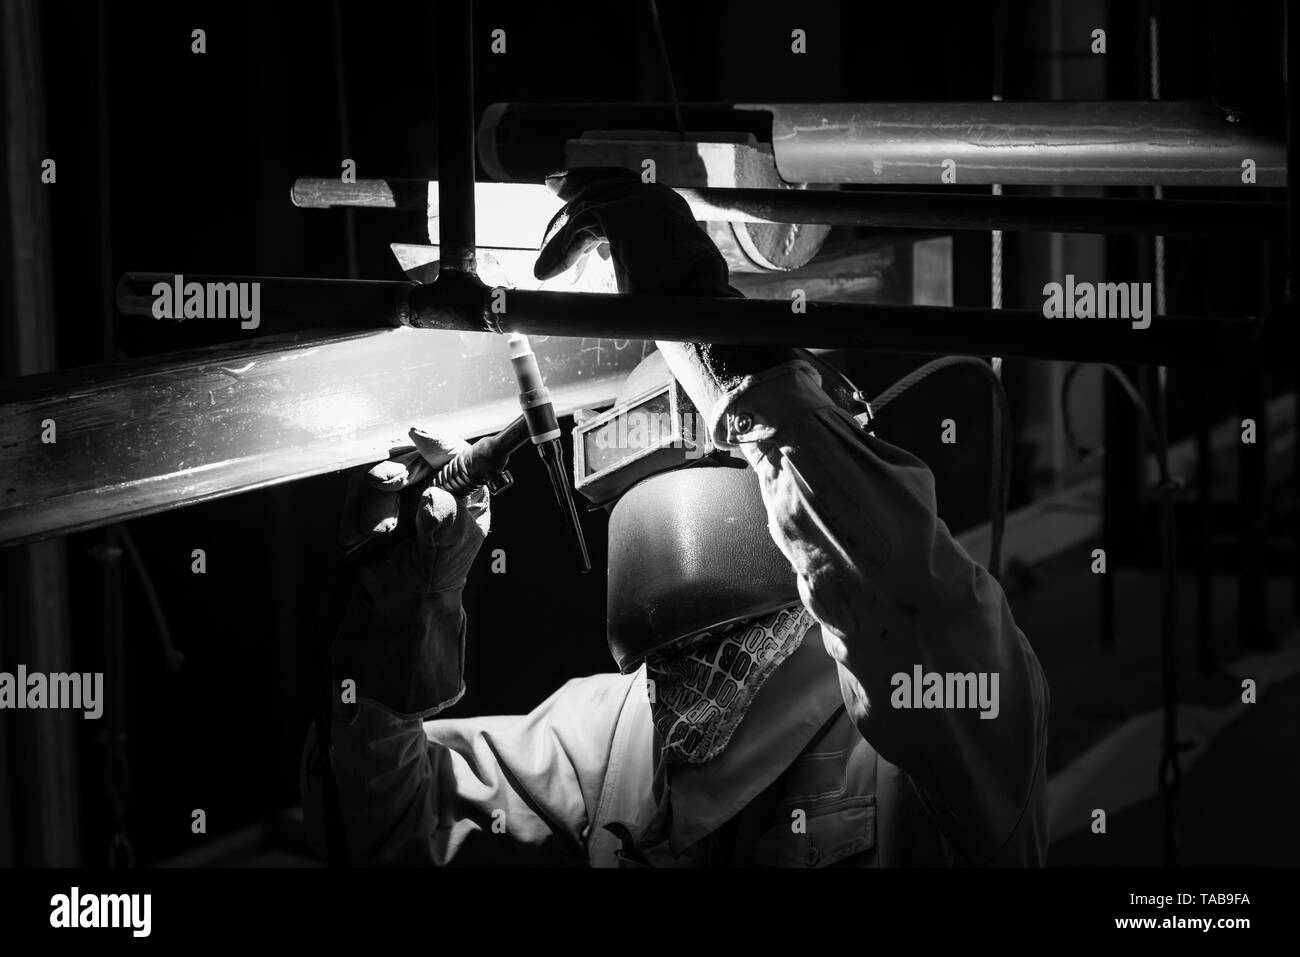 Welding steel pipe with Mig-Mag method for industrial work. Black & White concept. Stock Photo